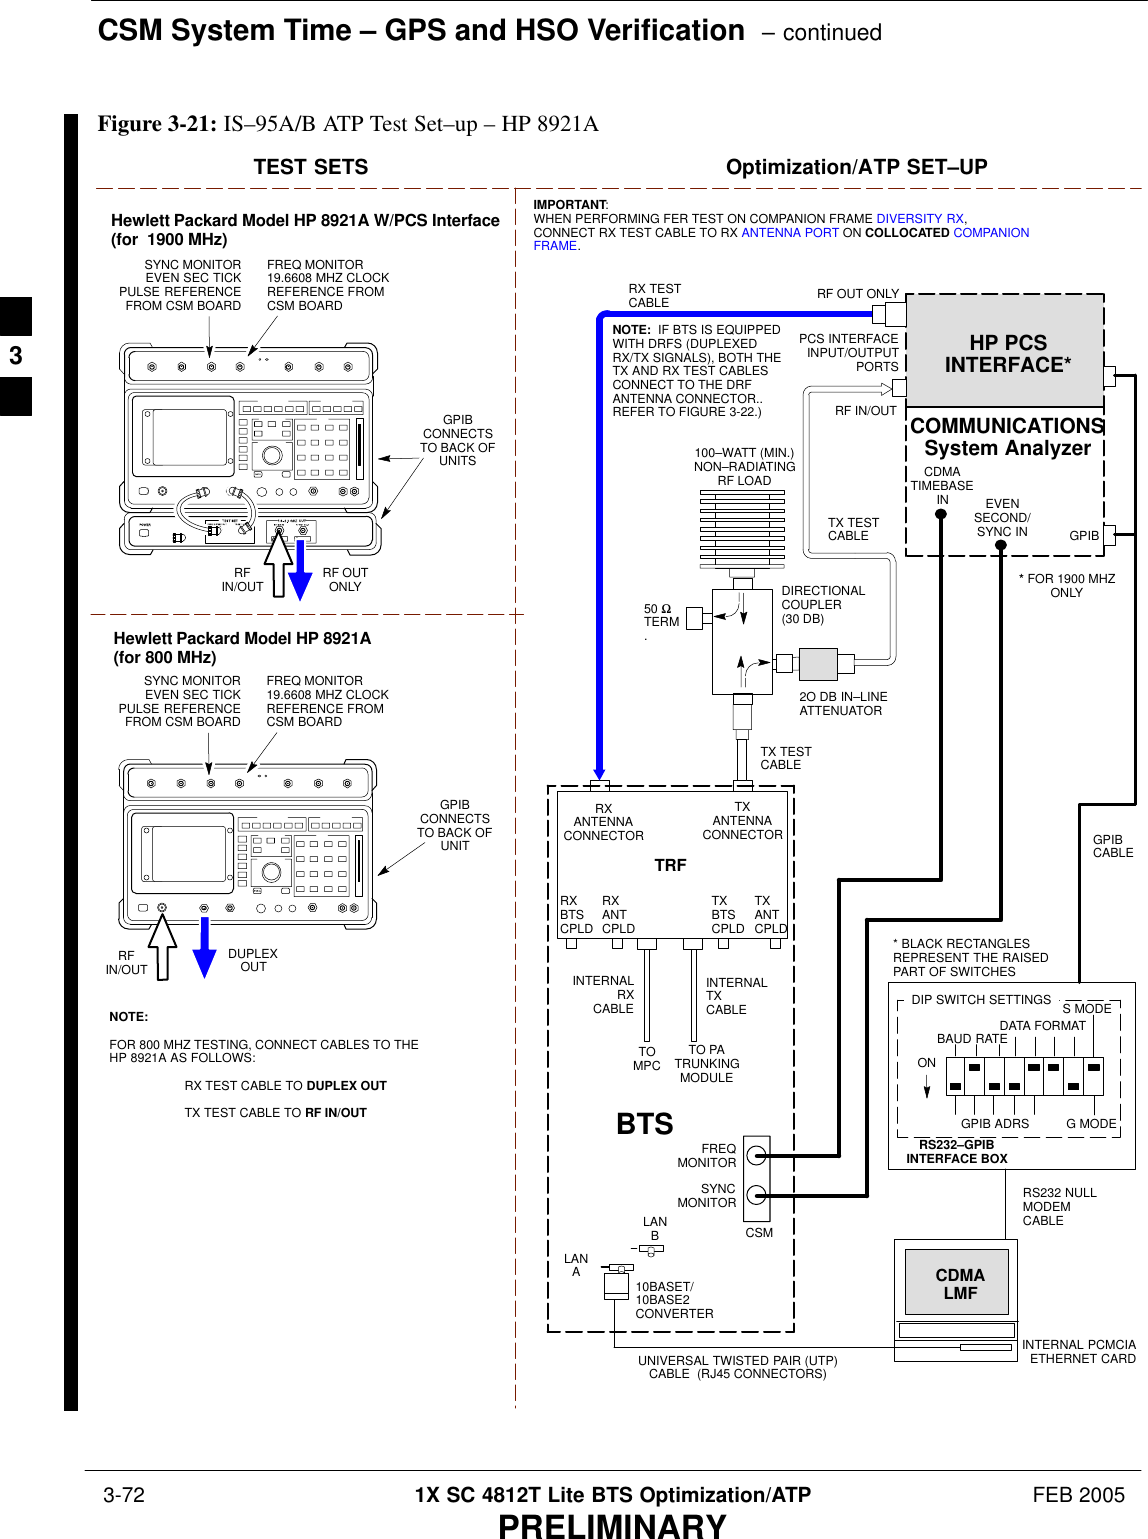 CSM System Time – GPS and HSO Verification  – continued 3-72 1X SC 4812T Lite BTS Optimization/ATP FEB 2005PRELIMINARYRF OUTONLYHewlett Packard Model HP 8921A W/PCS Interface(for  1900 MHz)GPIBCONNECTSTO BACK OFUNITSSYNC MONITOREVEN SEC TICKPULSE REFERENCEFROM CSM BOARDFREQ MONITOR19.6608 MHZ CLOCKREFERENCE FROMCSM BOARDTEST SETS Optimization/ATP SET–UPRFIN/OUTGPIBCONNECTSTO BACK OFUNITSYNC MONITOREVEN SEC TICKPULSE REFERENCEFROM CSM BOARDFREQ MONITOR19.6608 MHZ CLOCKREFERENCE FROMCSM BOARDHewlett Packard Model HP 8921A(for 800 MHz)RFIN/OUTDUPLEXOUTTOMPCTO PATRUNKINGMODULERS232–GPIBINTERFACE BOXINTERNAL PCMCIAETHERNET CARDGPIBCABLEUNIVERSAL TWISTED PAIR (UTP)CABLE  (RJ45 CONNECTORS)RS232 NULLMODEMCABLES MODEDATA FORMATBAUD RATEGPIB ADRS G MODEONBTSINTERNALTXCABLECDMALMFDIP SWITCH SETTINGS10BASET/10BASE2CONVERTERLANBLANARX TESTCABLEGPIBPCS INTERFACEINPUT/OUTPUTPORTSRXANTENNACONNECTORFREQMONITORSYNCMONITORCSMINTERNALRXCABLETXANTCPLDRXBTSCPLDTRFTXBTSCPLDRXANTCPLDTXANTENNACONNECTORCOMMUNICATIONSSystem Analyzer50 ΩTERM.TX TESTCABLEDIRECTIONALCOUPLER(30 DB)100–WATT (MIN.)NON–RADIATINGRF LOADTX TESTCABLE* BLACK RECTANGLESREPRESENT THE RAISEDPART OF SWITCHESCDMATIMEBASEIN EVENSECOND/SYNC INNOTE:  IF BTS IS EQUIPPEDWITH DRFS (DUPLEXEDRX/TX SIGNALS), BOTH THETX AND RX TEST CABLESCONNECT TO THE DRFANTENNA CONNECTOR..REFER TO FIGURE 3-22.)HP PCSINTERFACE*2O DB IN–LINEATTENUATOR* FOR 1900 MHZONLYRF OUT ONLYRF IN/OUTNOTE:FOR 800 MHZ TESTING, CONNECT CABLES TO THEHP 8921A AS FOLLOWS:RX TEST CABLE TO DUPLEX OUTTX TEST CABLE TO RF IN/OUTIMPORTANT:WHEN PERFORMING FER TEST ON COMPANION FRAME DIVERSITY RX,CONNECT RX TEST CABLE TO RX ANTENNA PORT ON COLLOCATED COMPANIONFRAME.Figure 3-21: IS–95A/B ATP Test Set–up – HP 8921A3